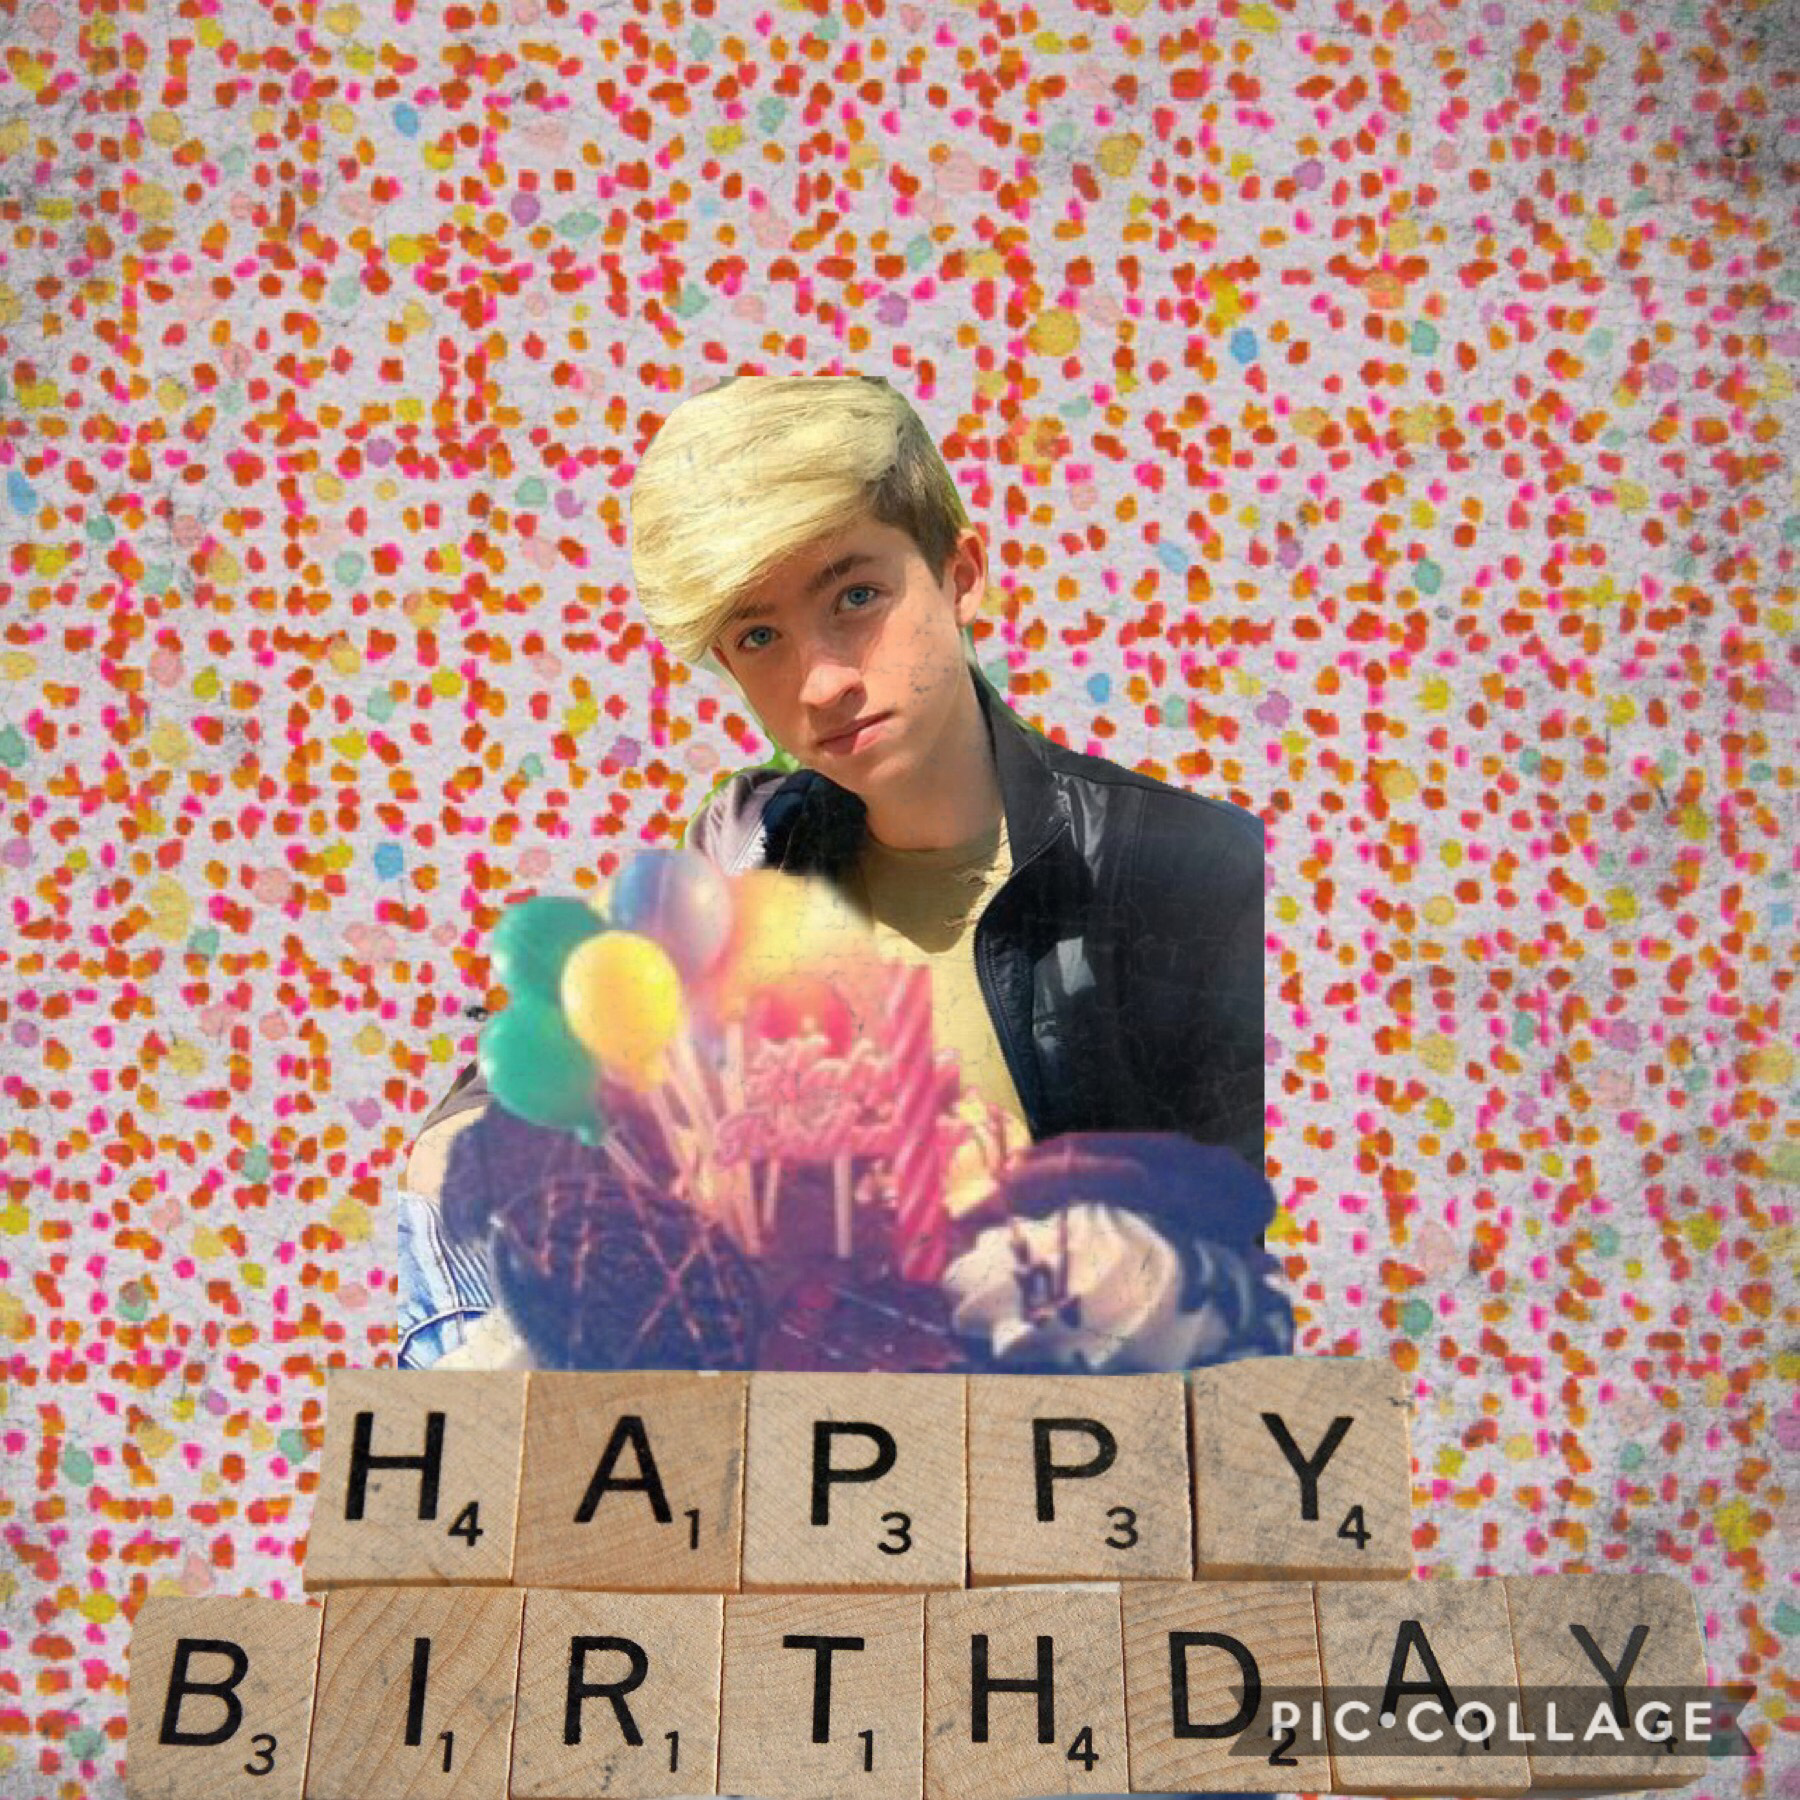 🎉Tap🎉
Happy b-day, Cash! We love you! Have a great day today!
QOTD: What special thing happened on your birthday?
AOTD: Nothing! I got no special surprise, no wishes, no nothing!